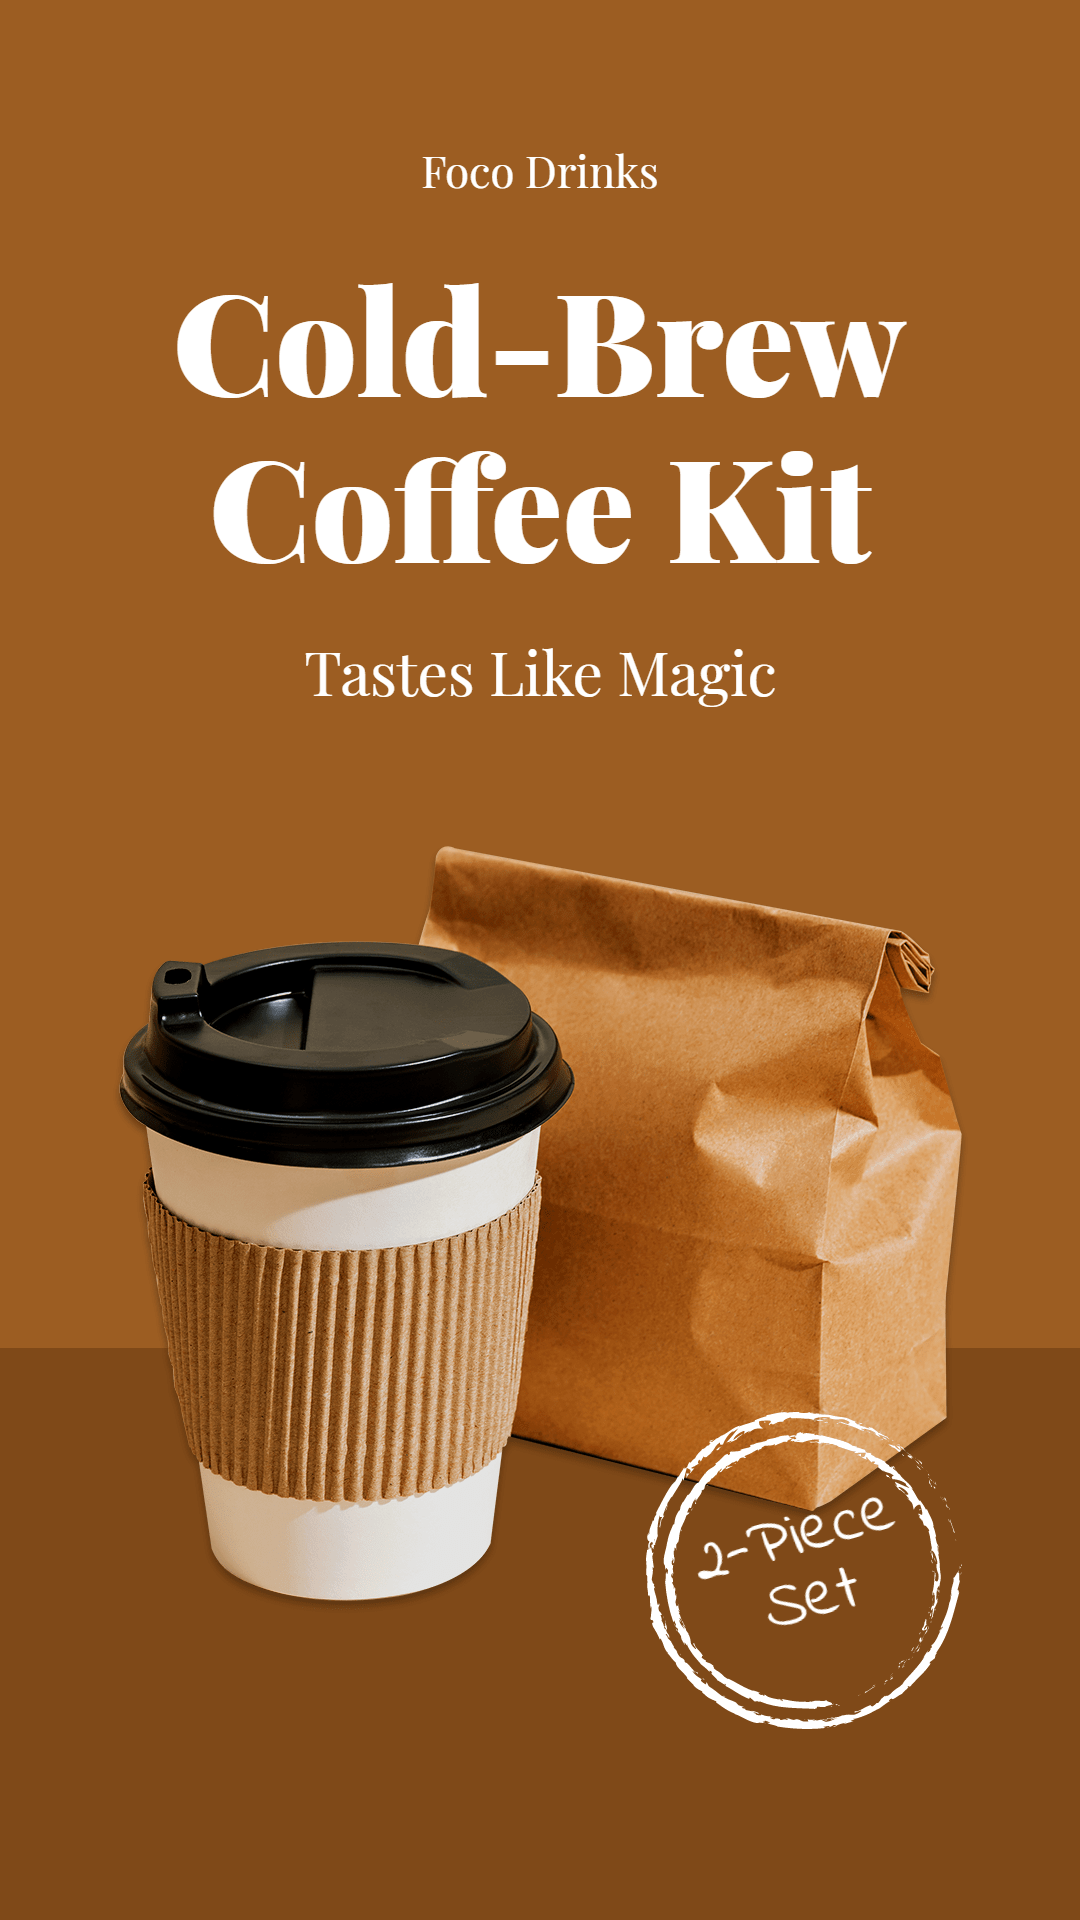 Retro Style Cold-Brew Coffee Kit Promotion Ecommerce Story